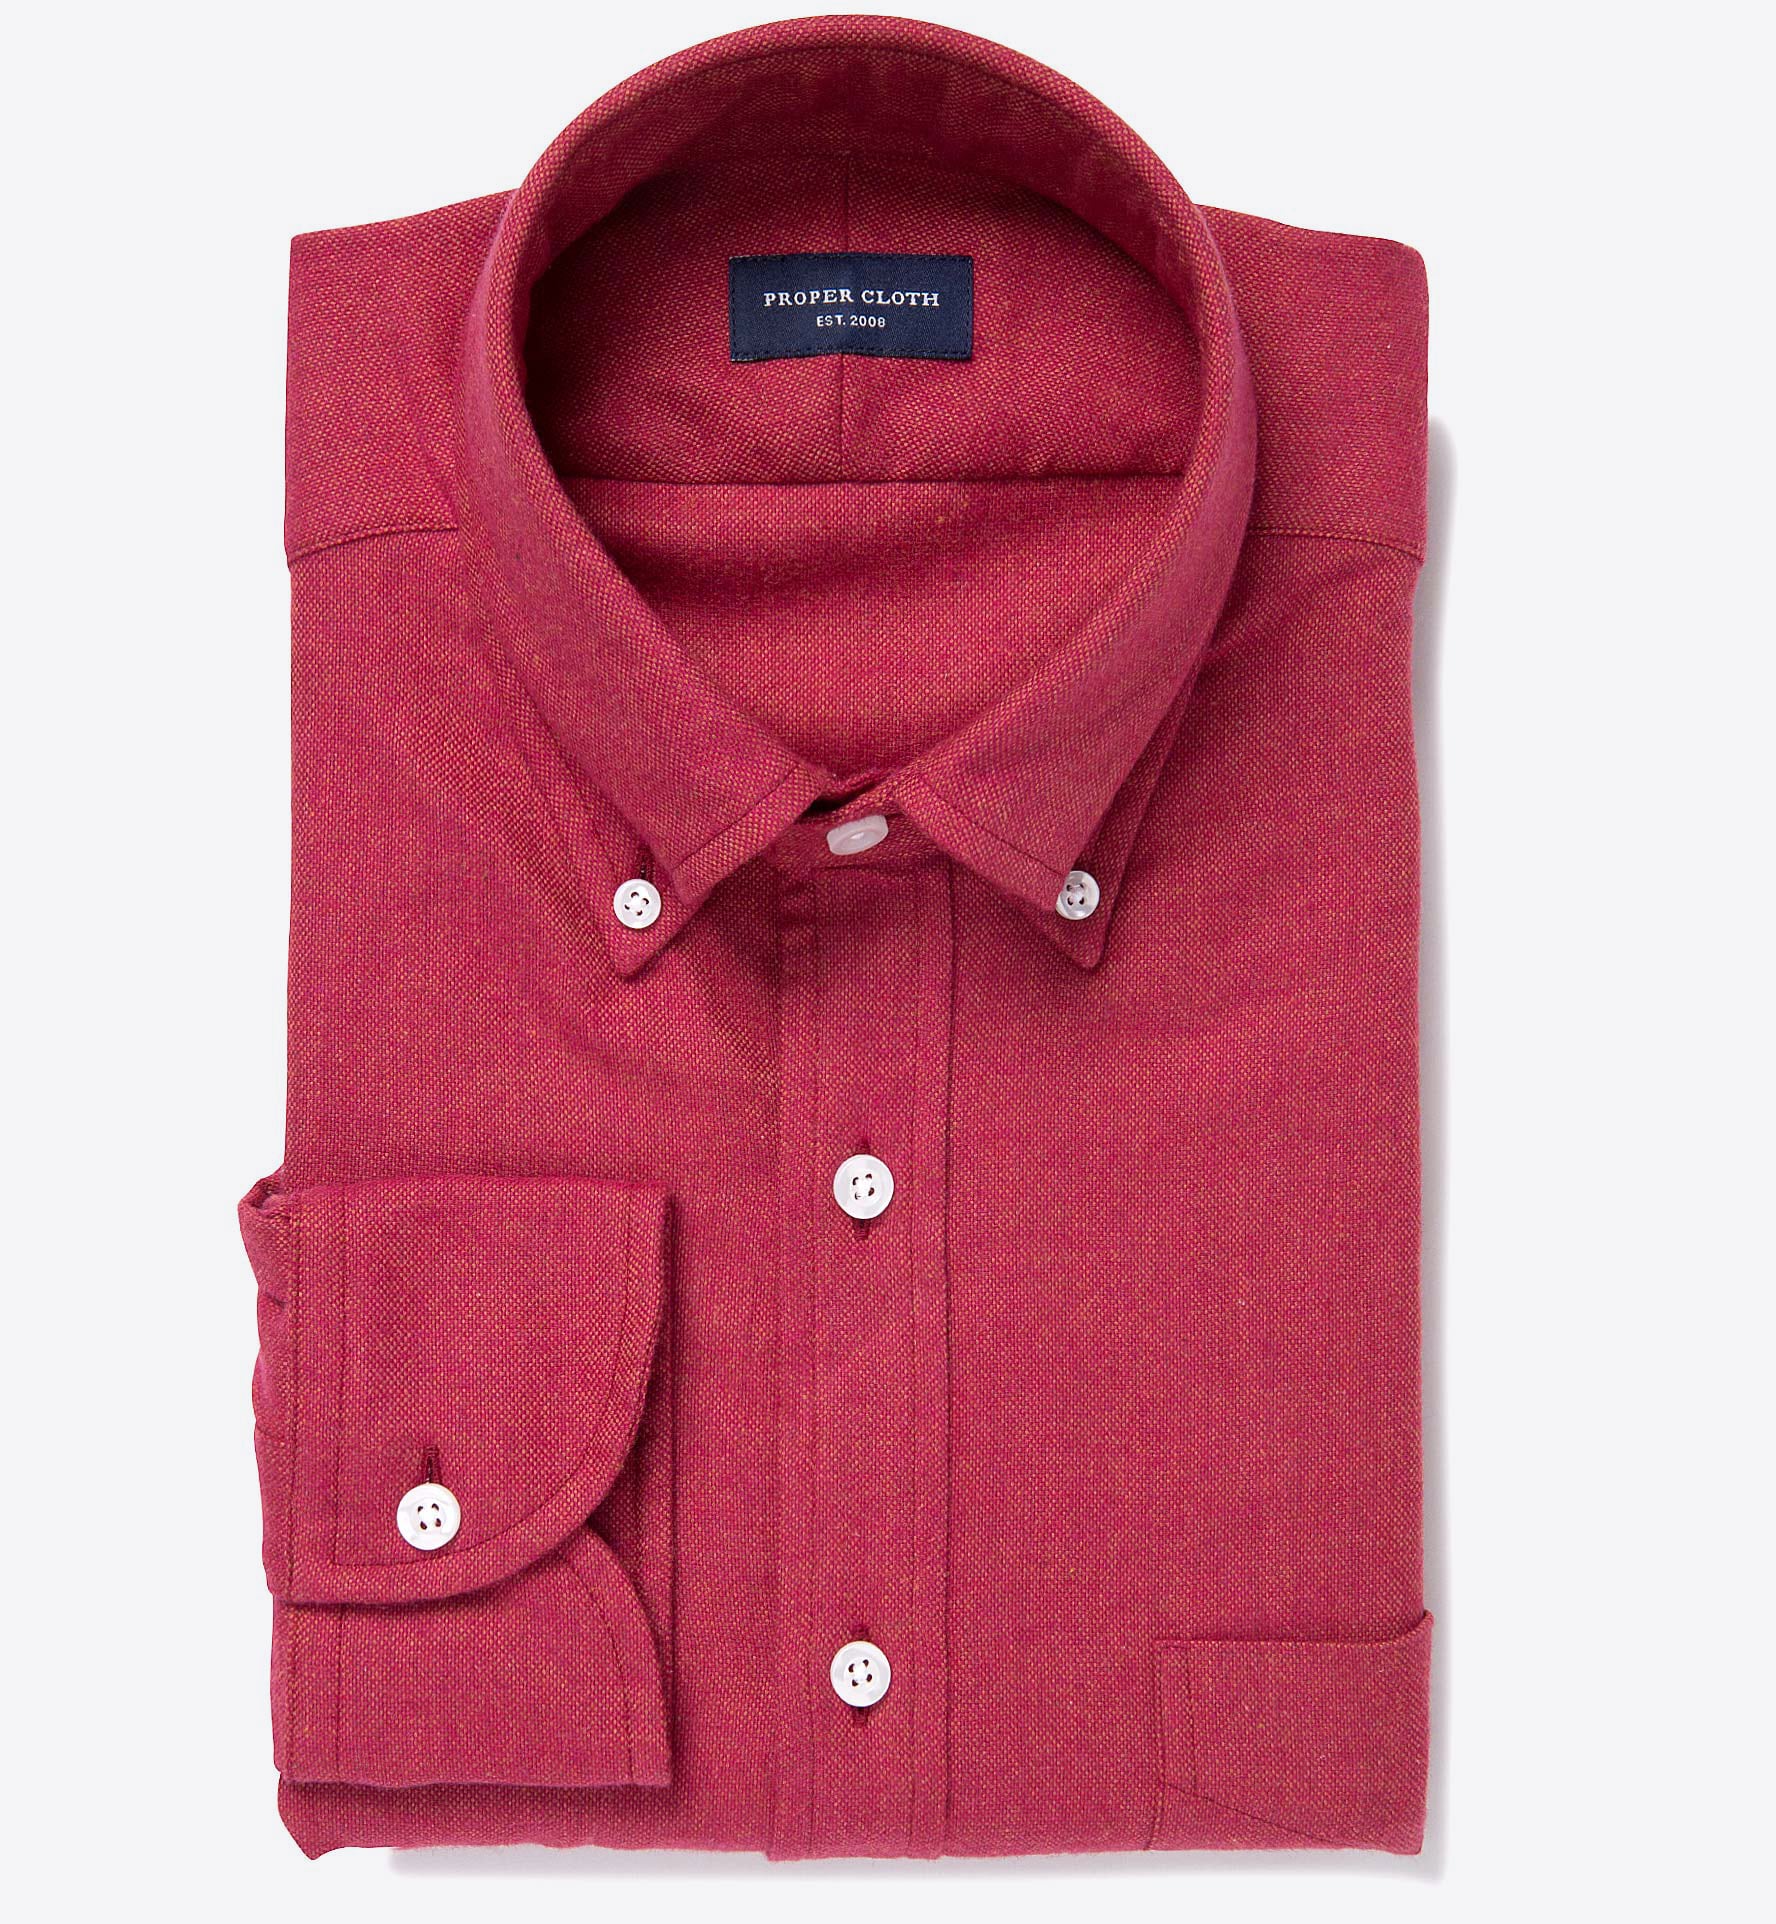 Canclini Red Oxford Beacon Flannel Men's Dress Shirt by Proper Cloth